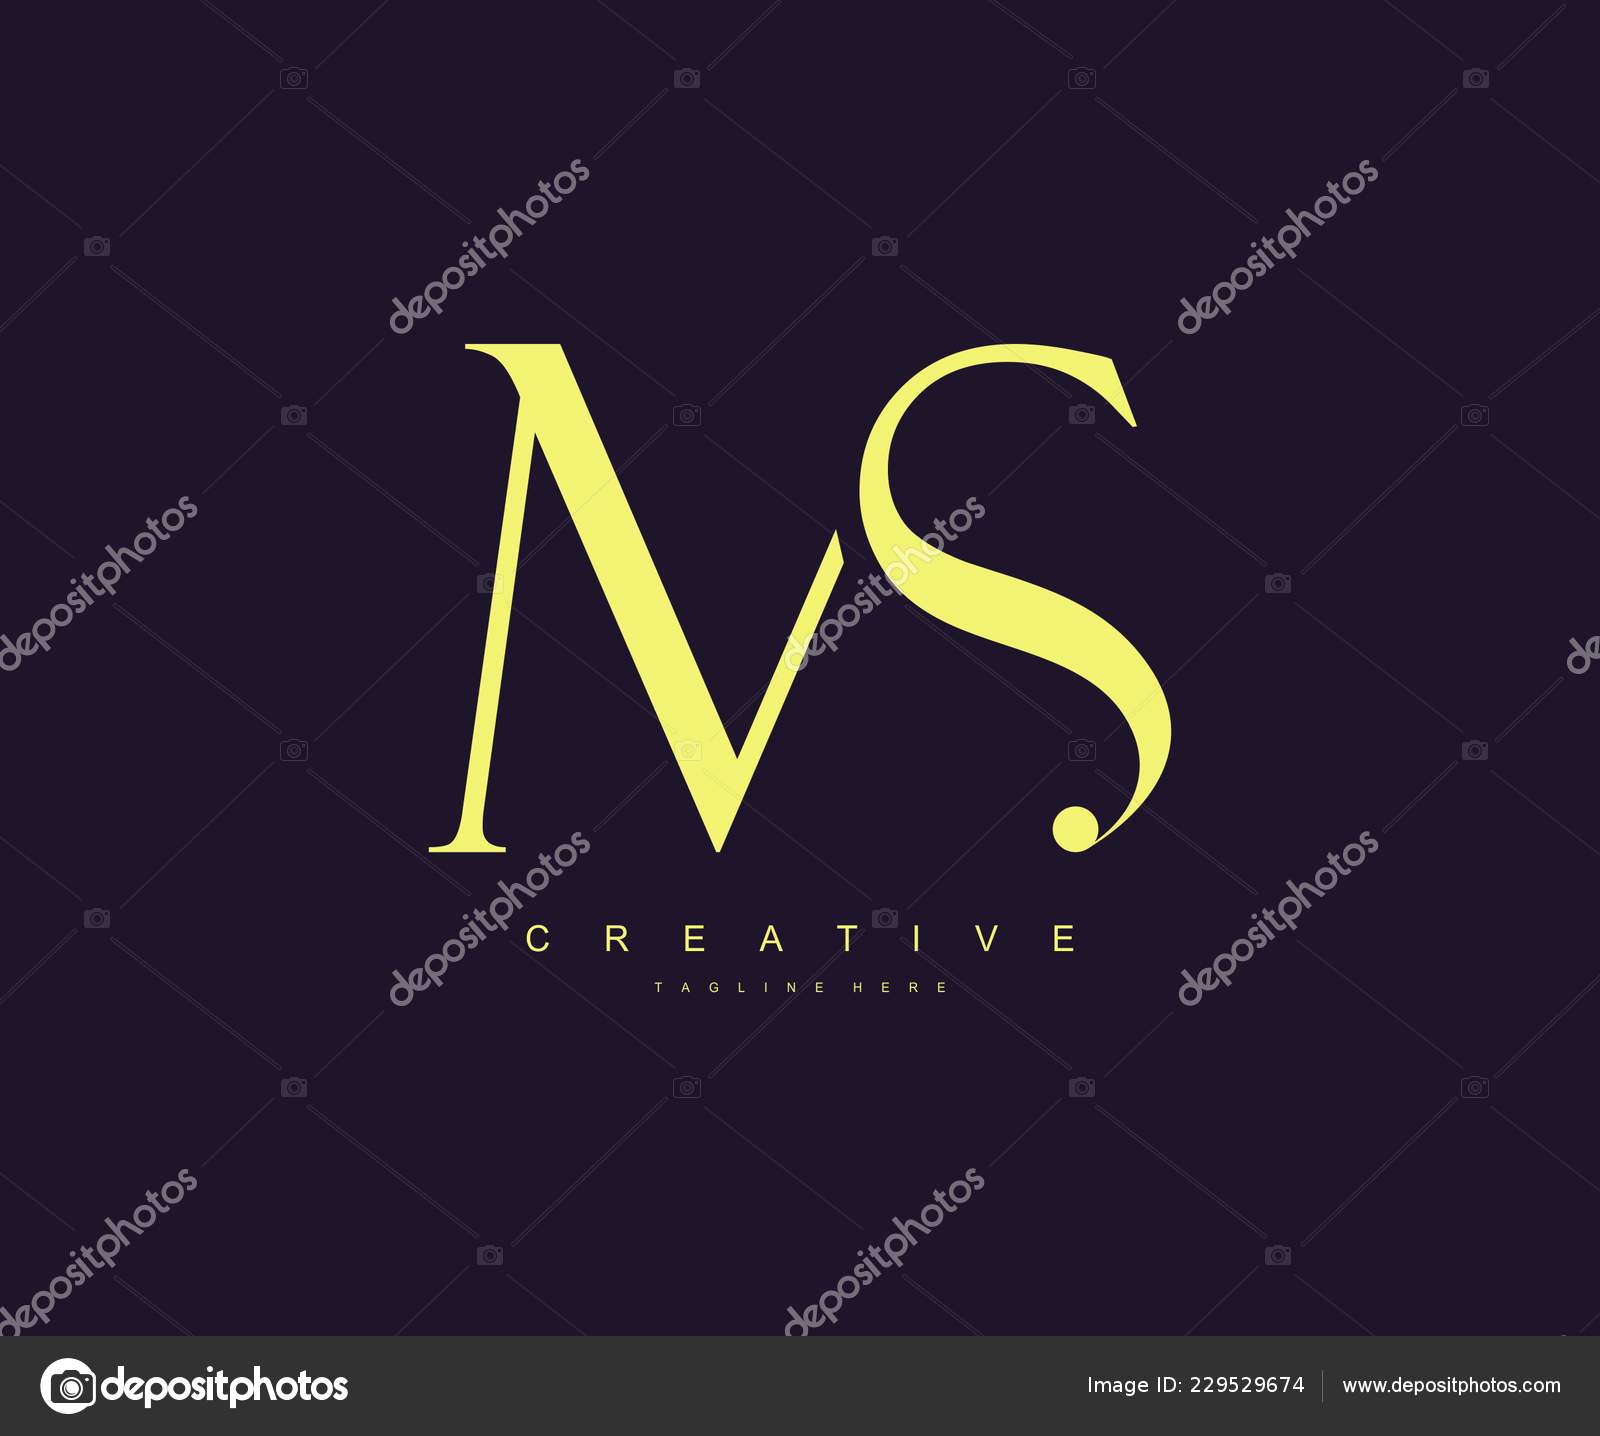 Ms Royalty Free Ms Vector Images Drawings Depositphotos